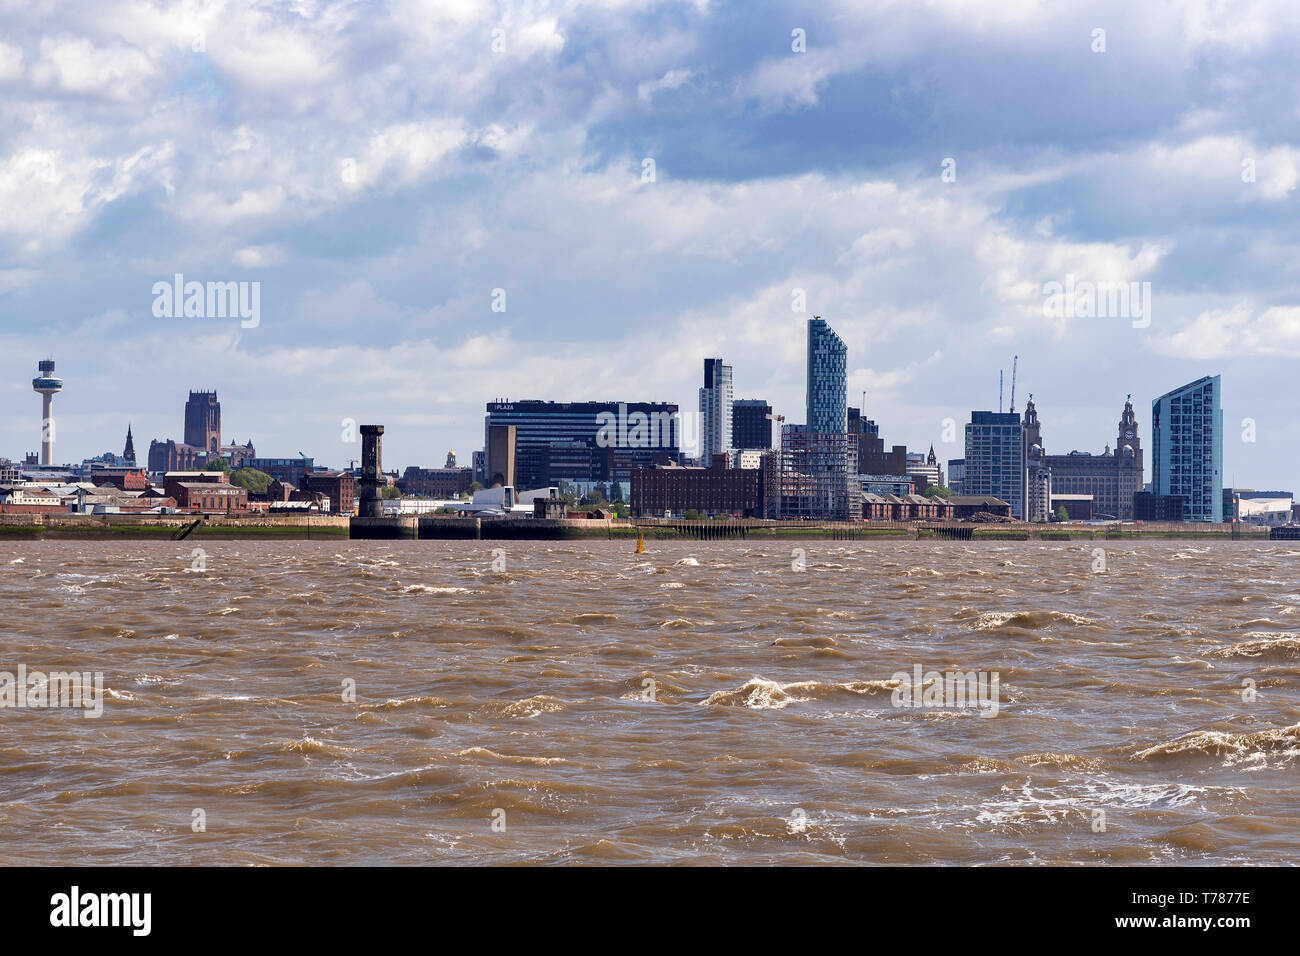 Liverpool skyline from the river Mersey. Stock Photo